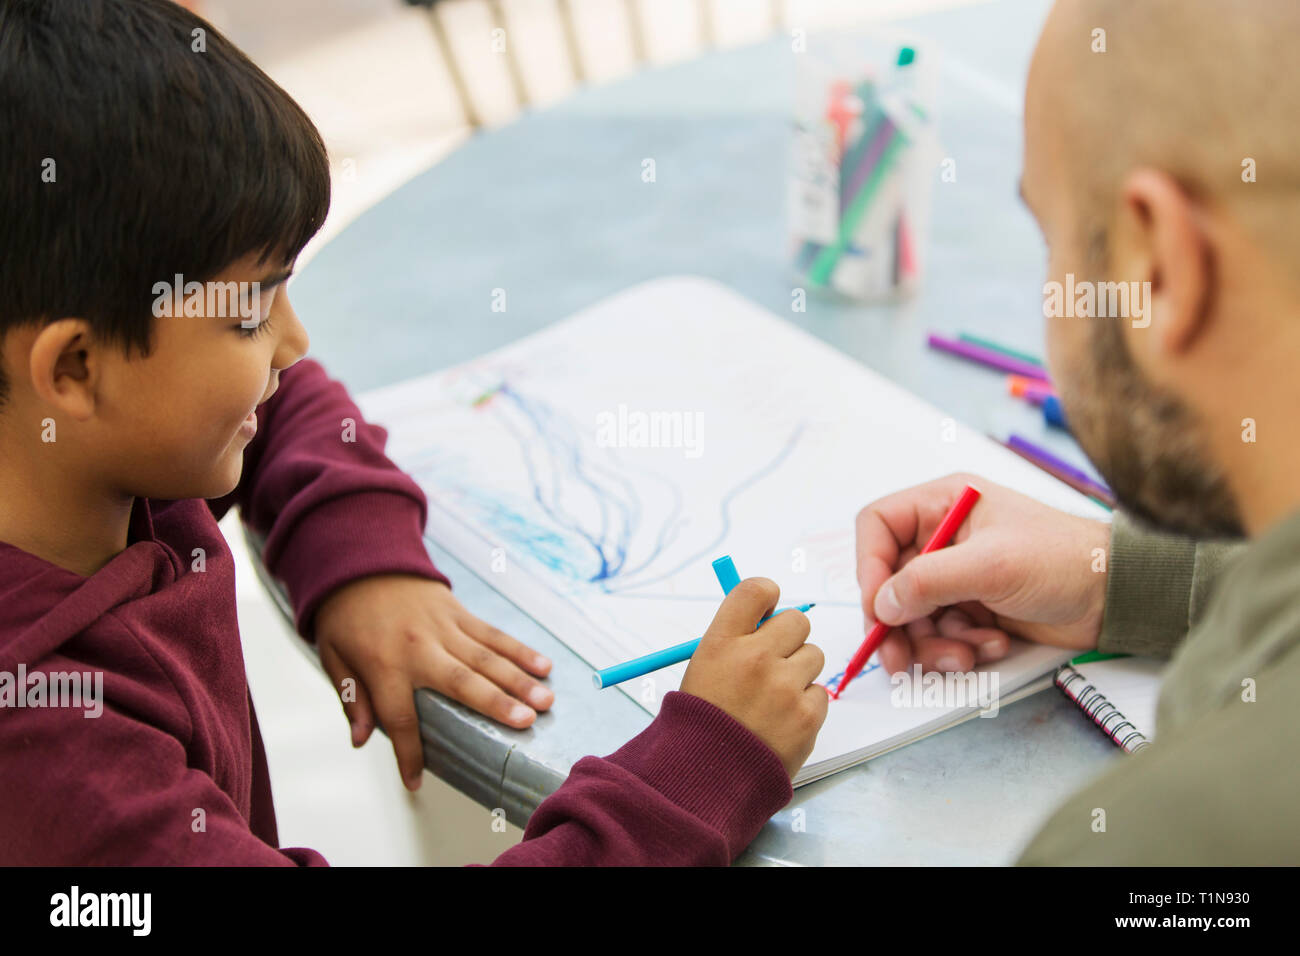 Father and son coloring at table Stock Photo